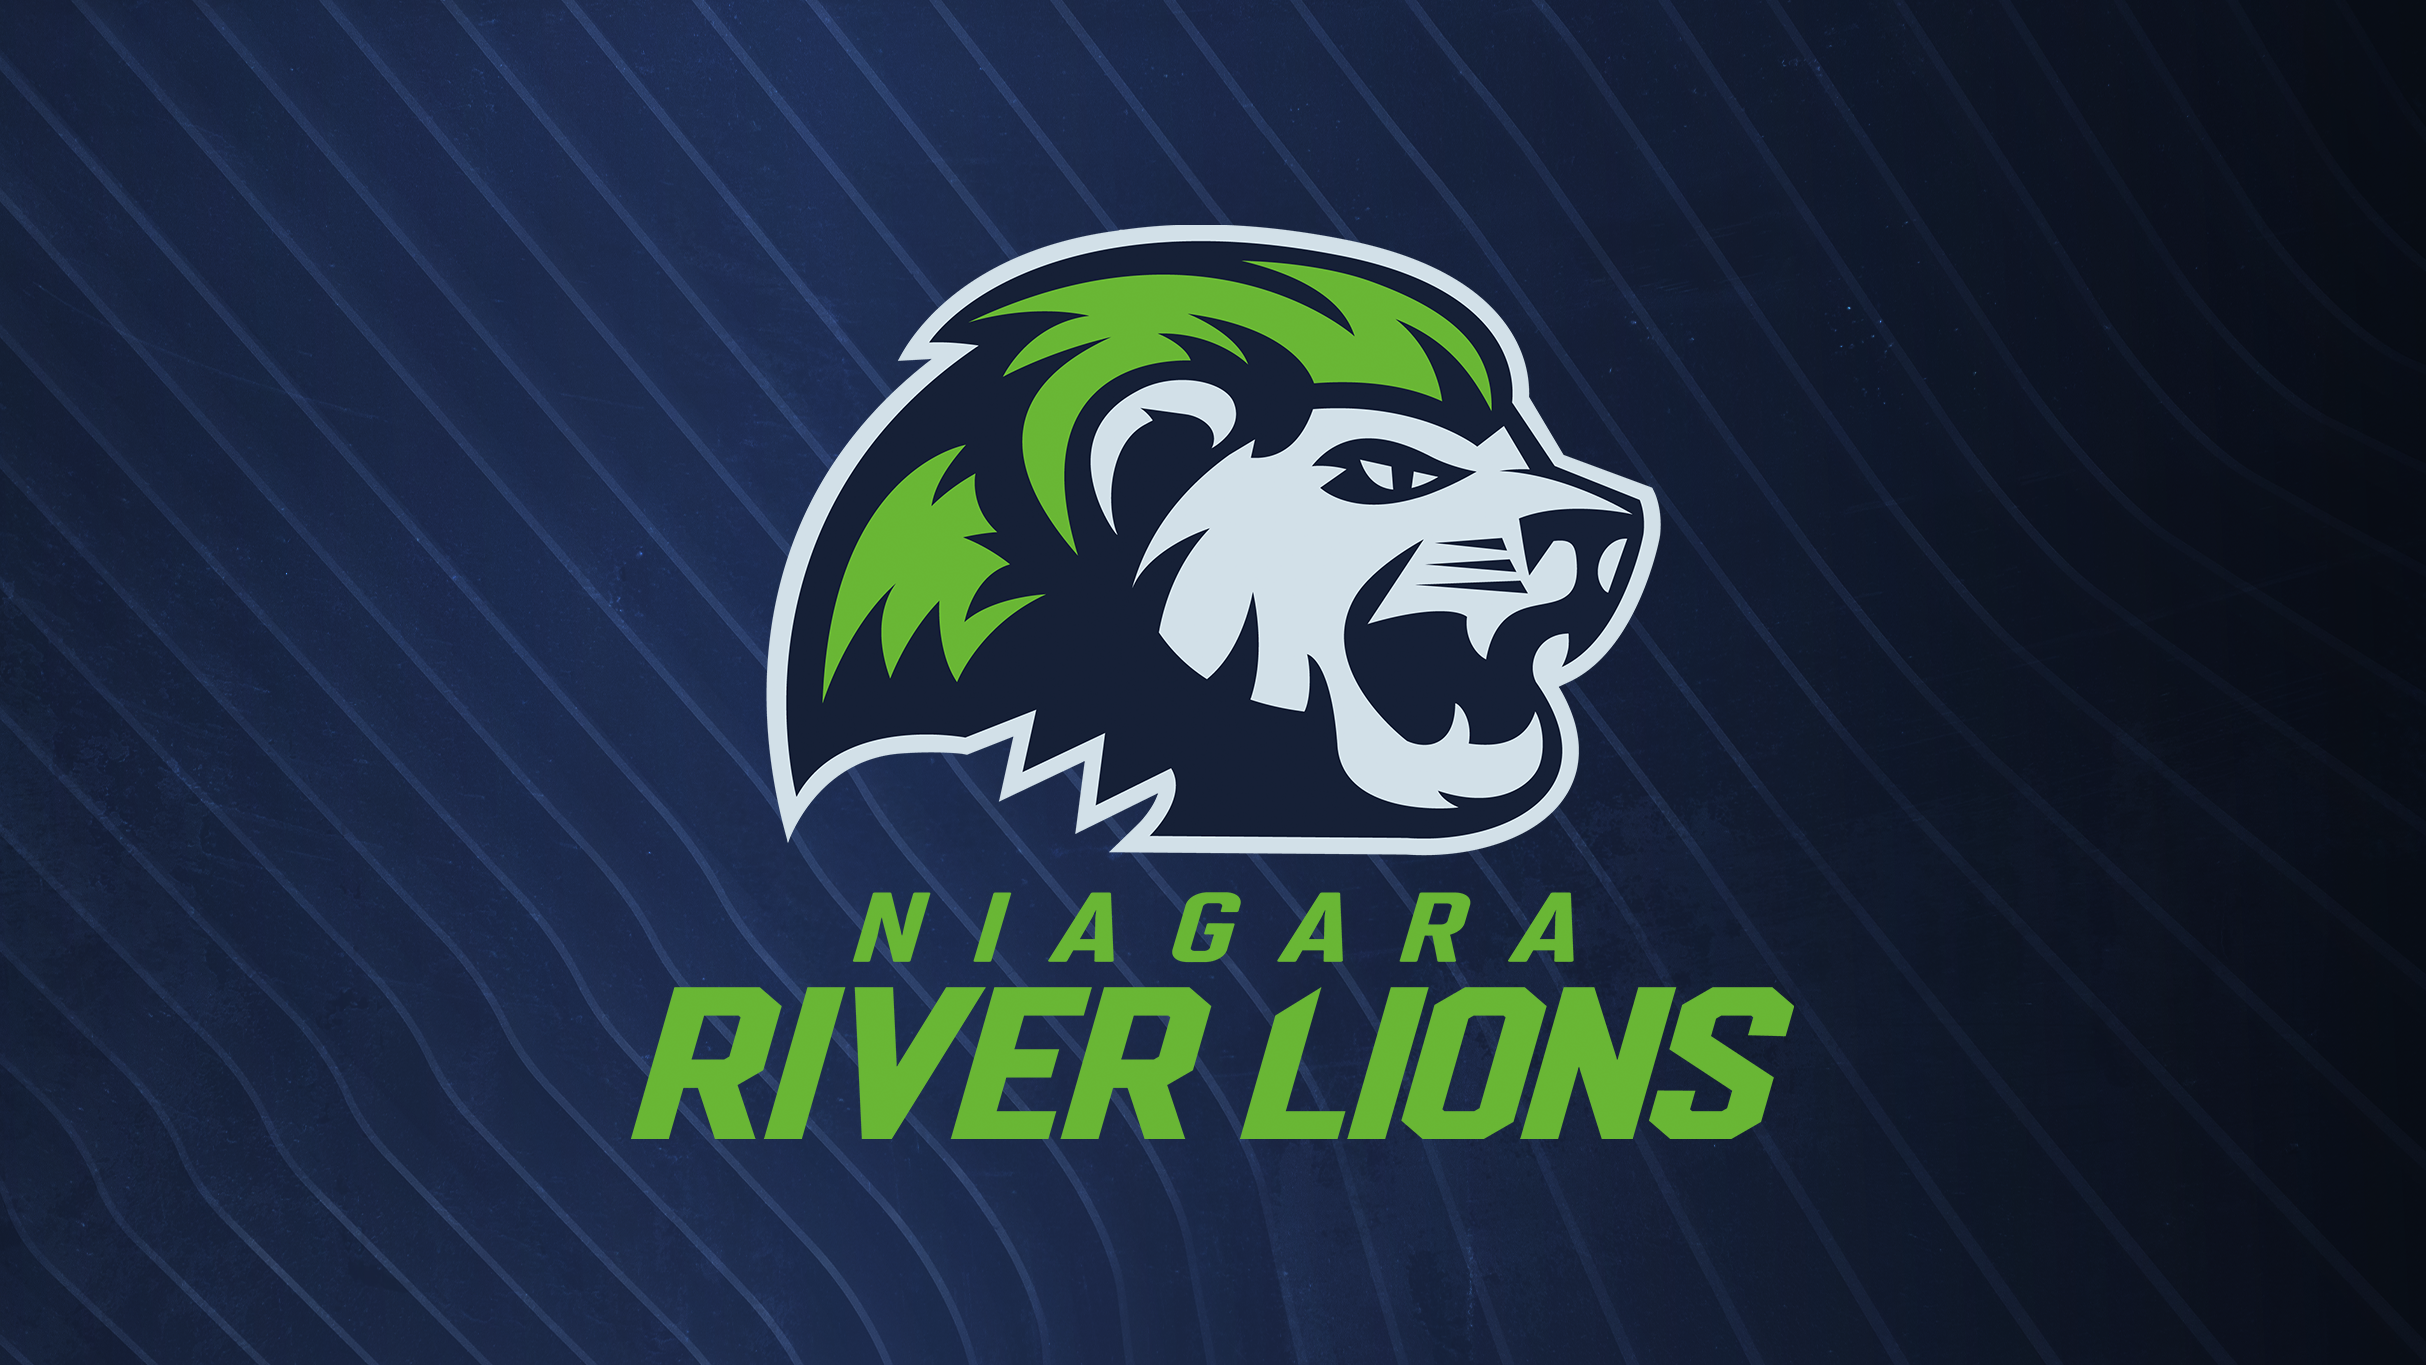 presale code for Niagara River Lions affordable tickets in St Catharines